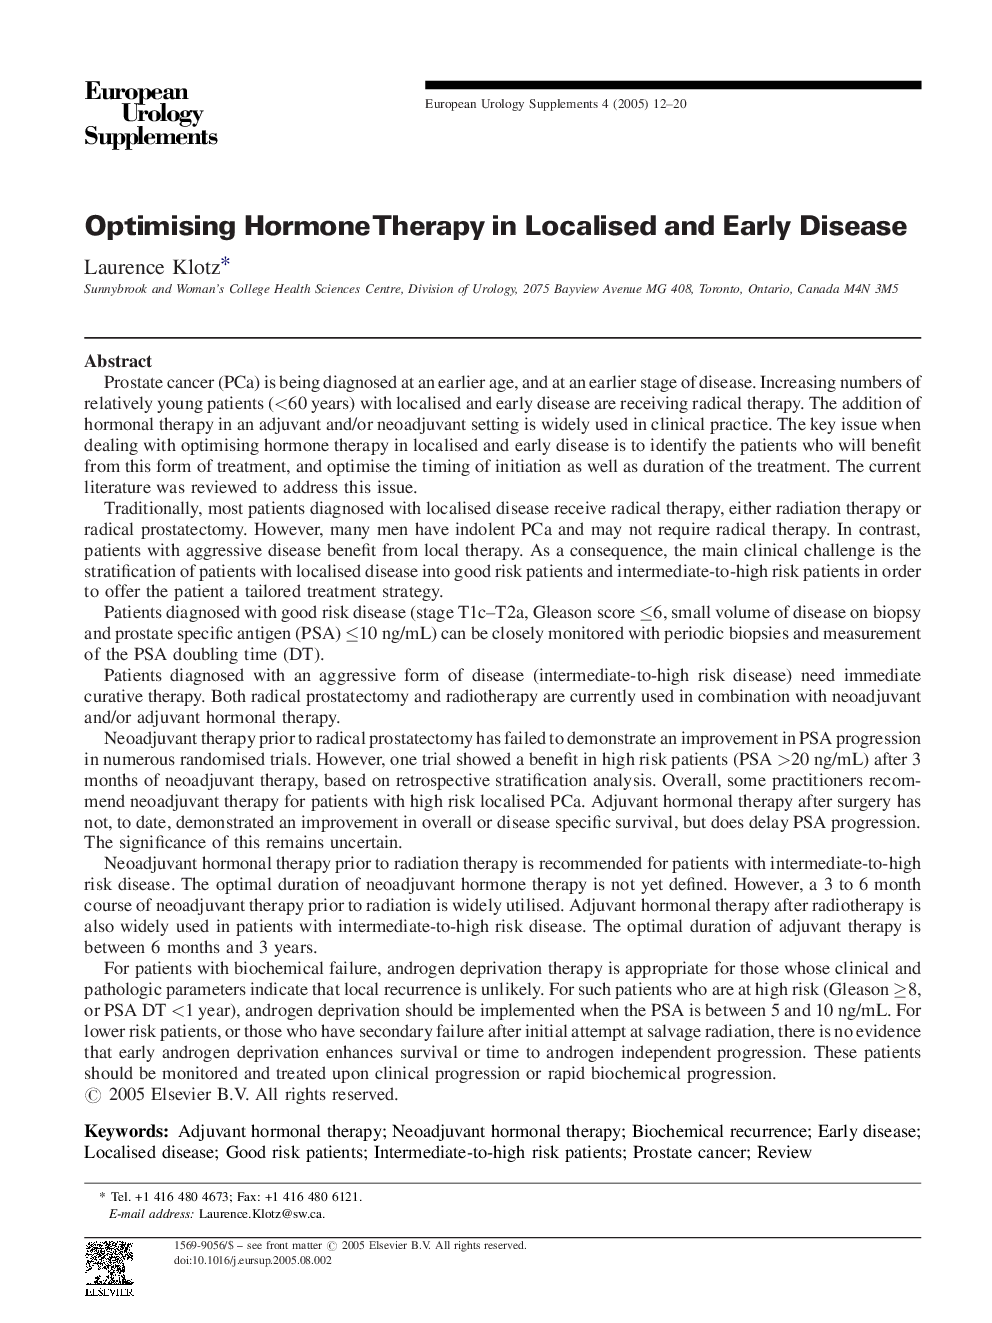 Optimising Hormone Therapy in Localised and Early Disease